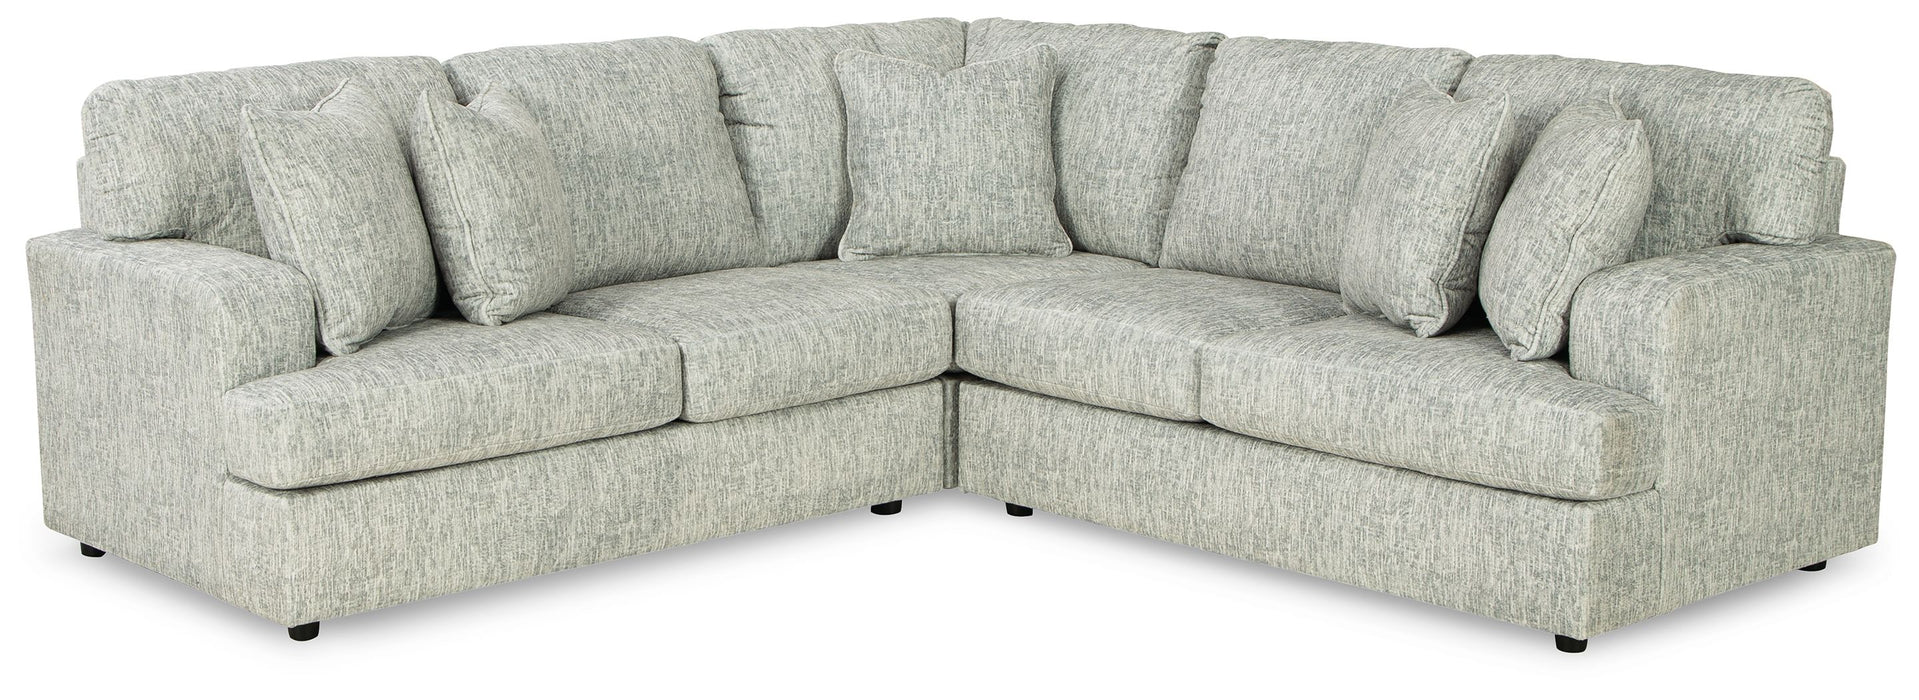 Playwrite - Loveseat Sectional